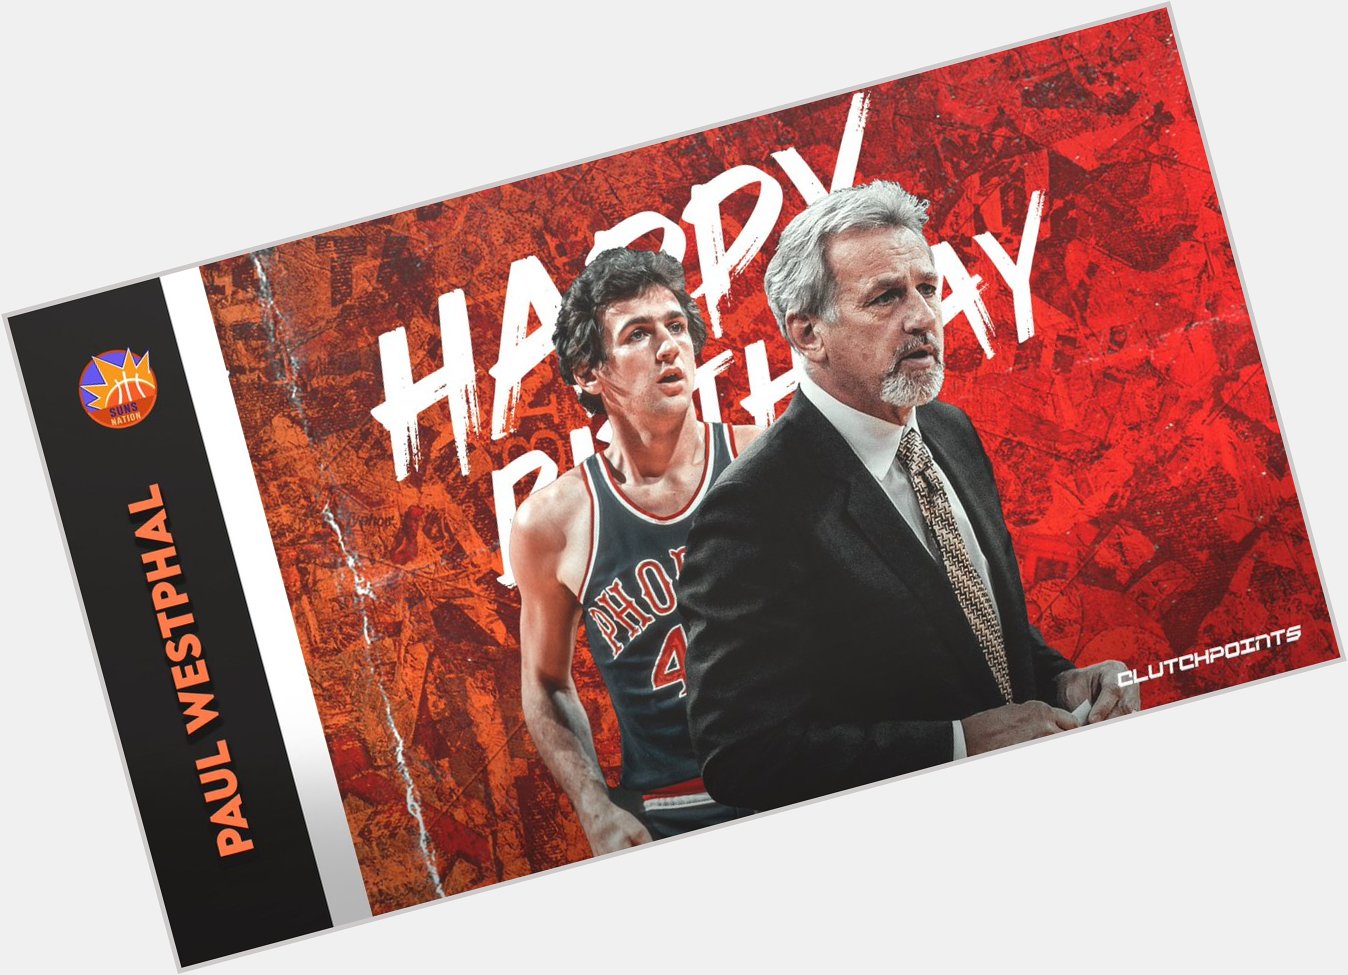 Suns Nation, join us in wishing Paul Westphal a happy 70th birthday! 